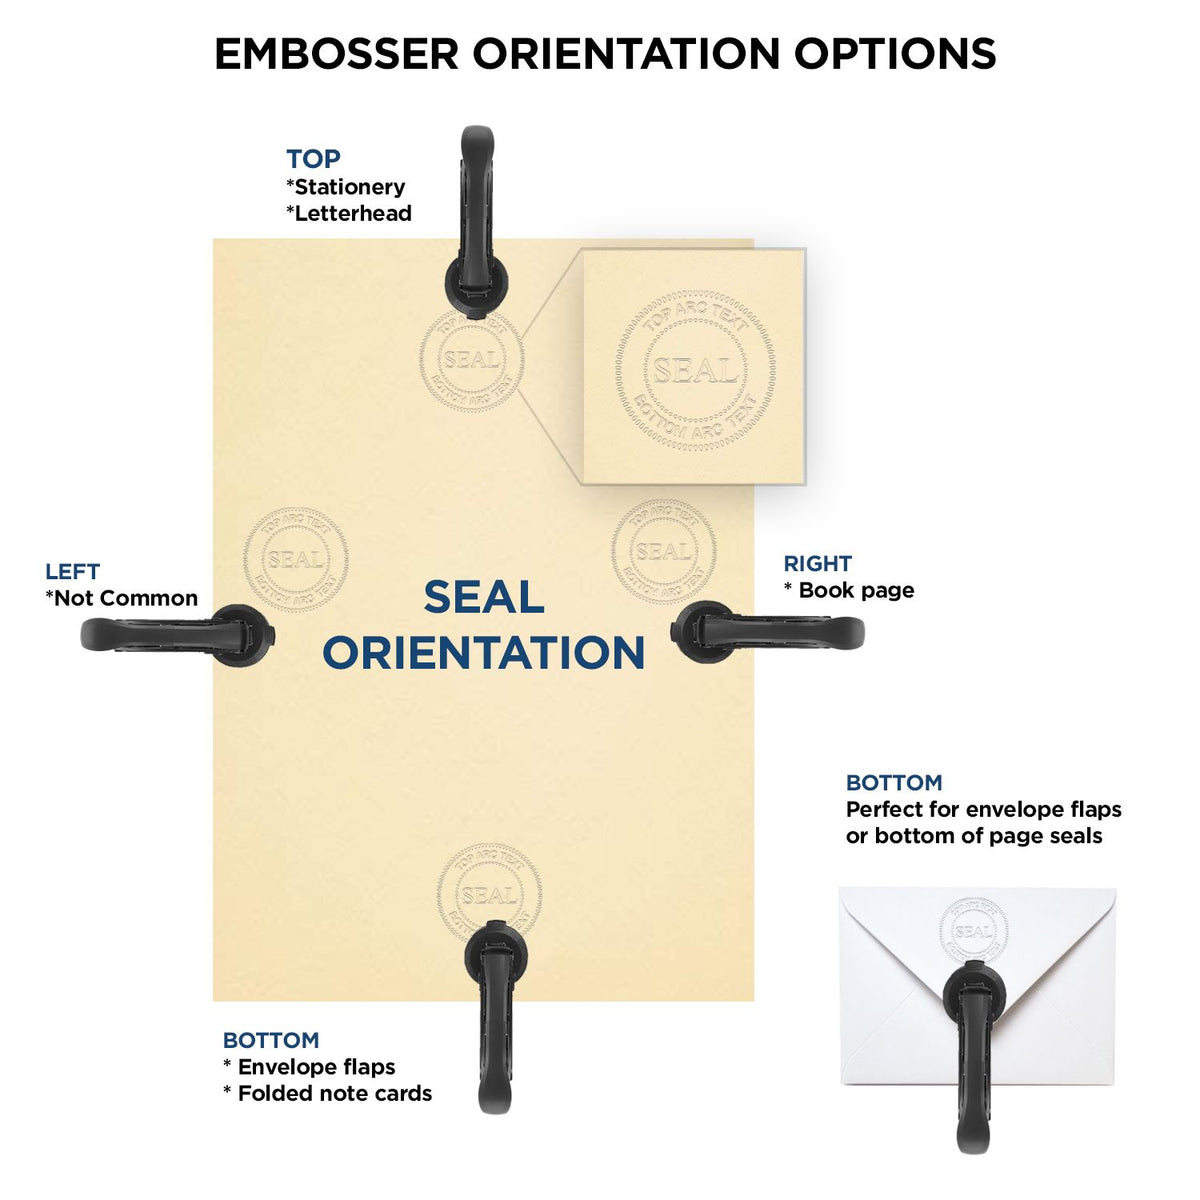 An infographic for the State of Arkansas Extended Long Reach Engineer Seal showing embosser orientation, this is showing examples of a top, bottom, right and left insert.